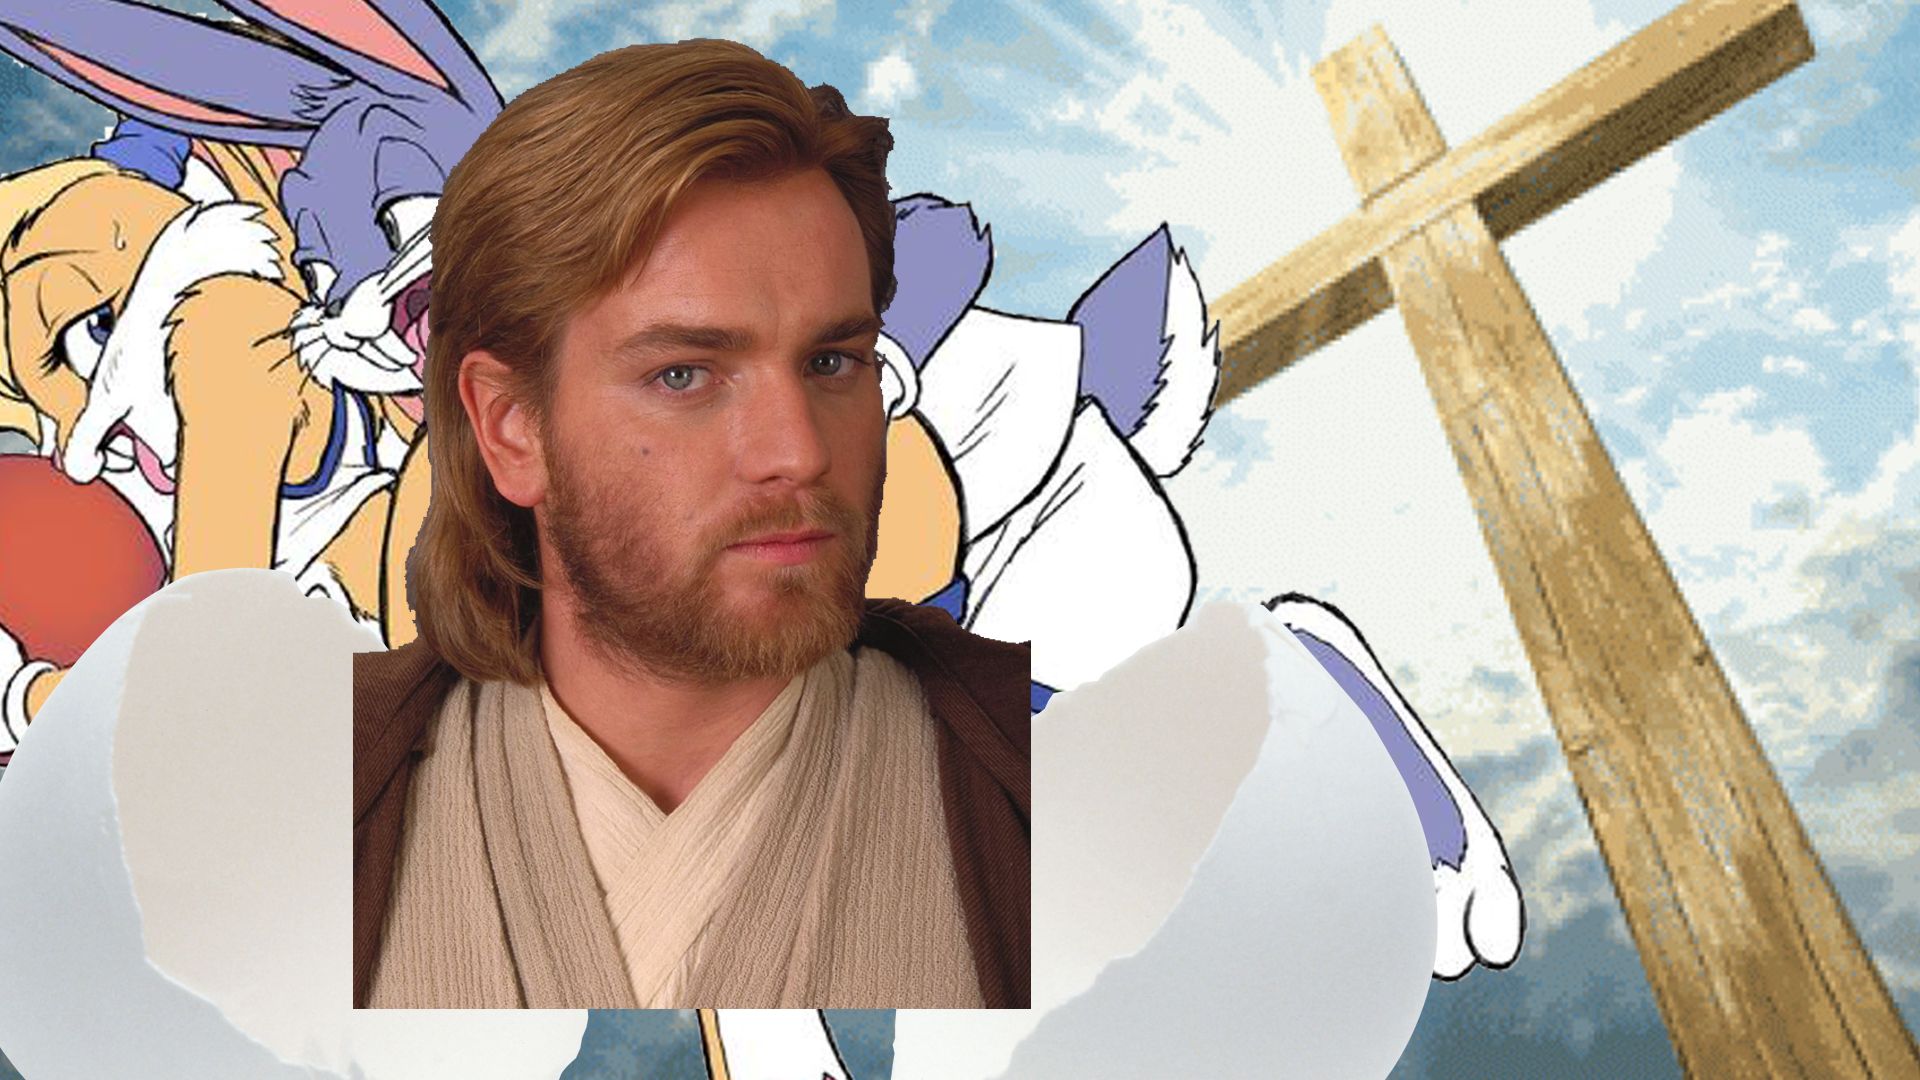 Let's Take A Moment To Talk About Jesus